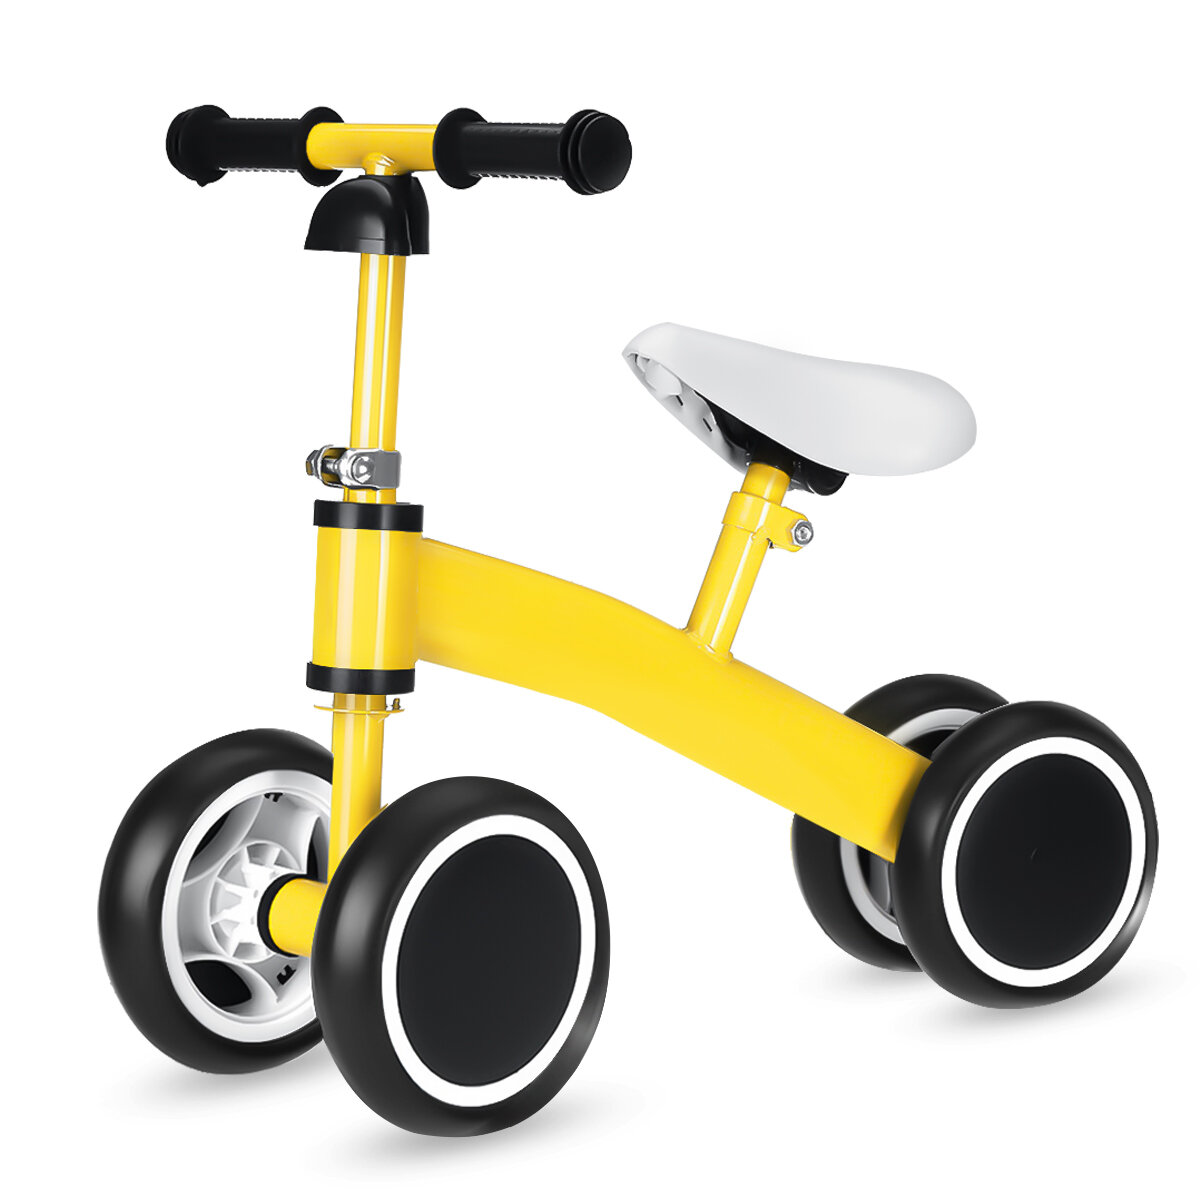 Baby Balance Bike 4 Wheels No Pedal Design Bicycle With Adjustable Seat Height Kids Training Walking Tricycle For 1-3 Ye